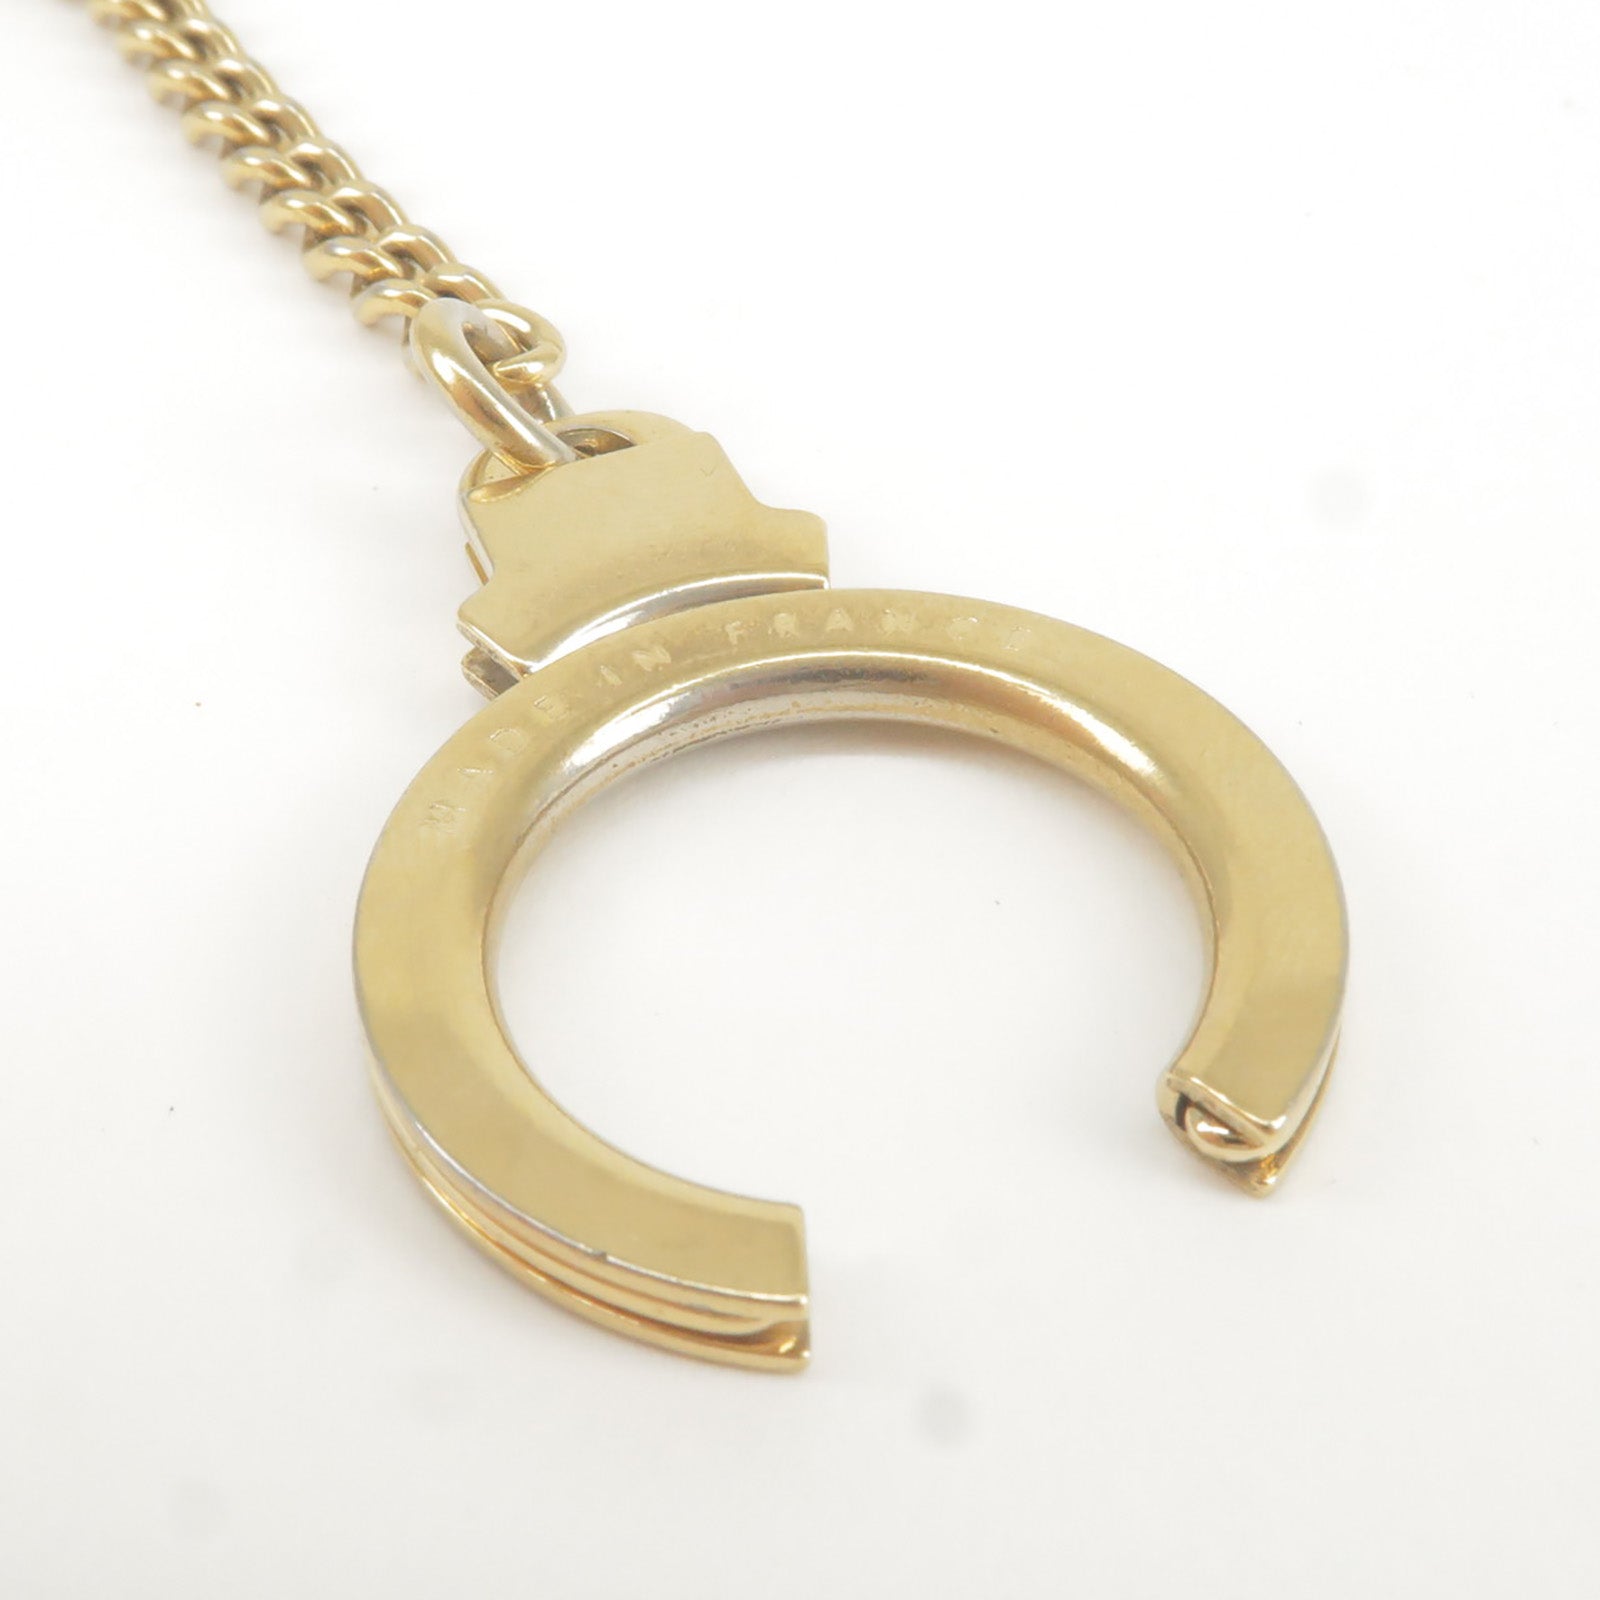 Louis Vuitton x Nigo Squared Necklace Gold in Gold Metal with Gold